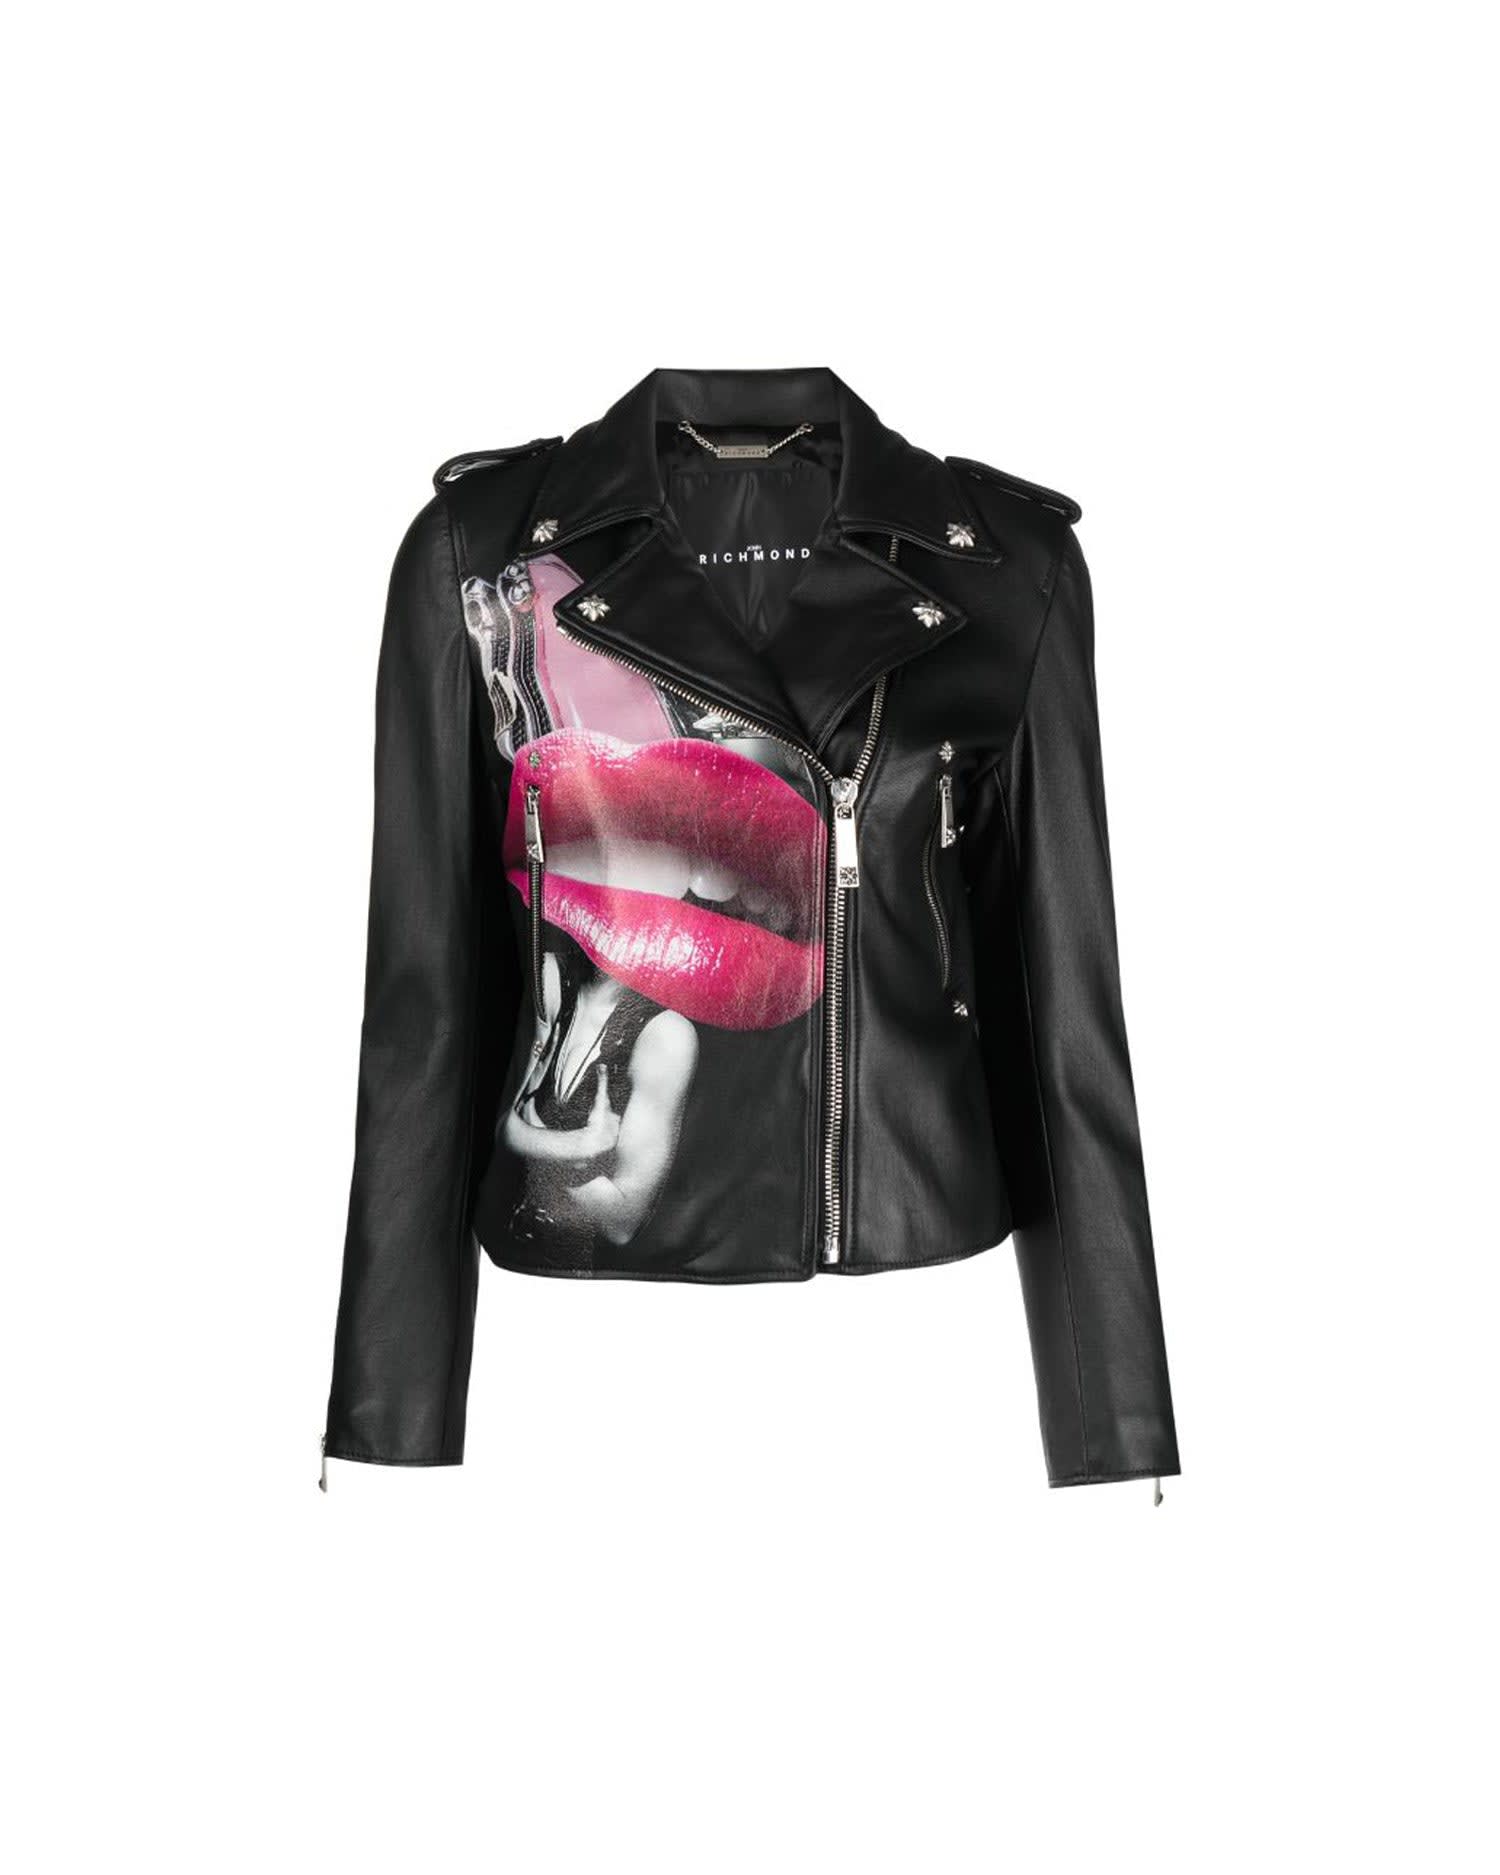 100% Leather Jacket With Heat Pressed Print. Decentralised Fastener By Contrasting Zip.